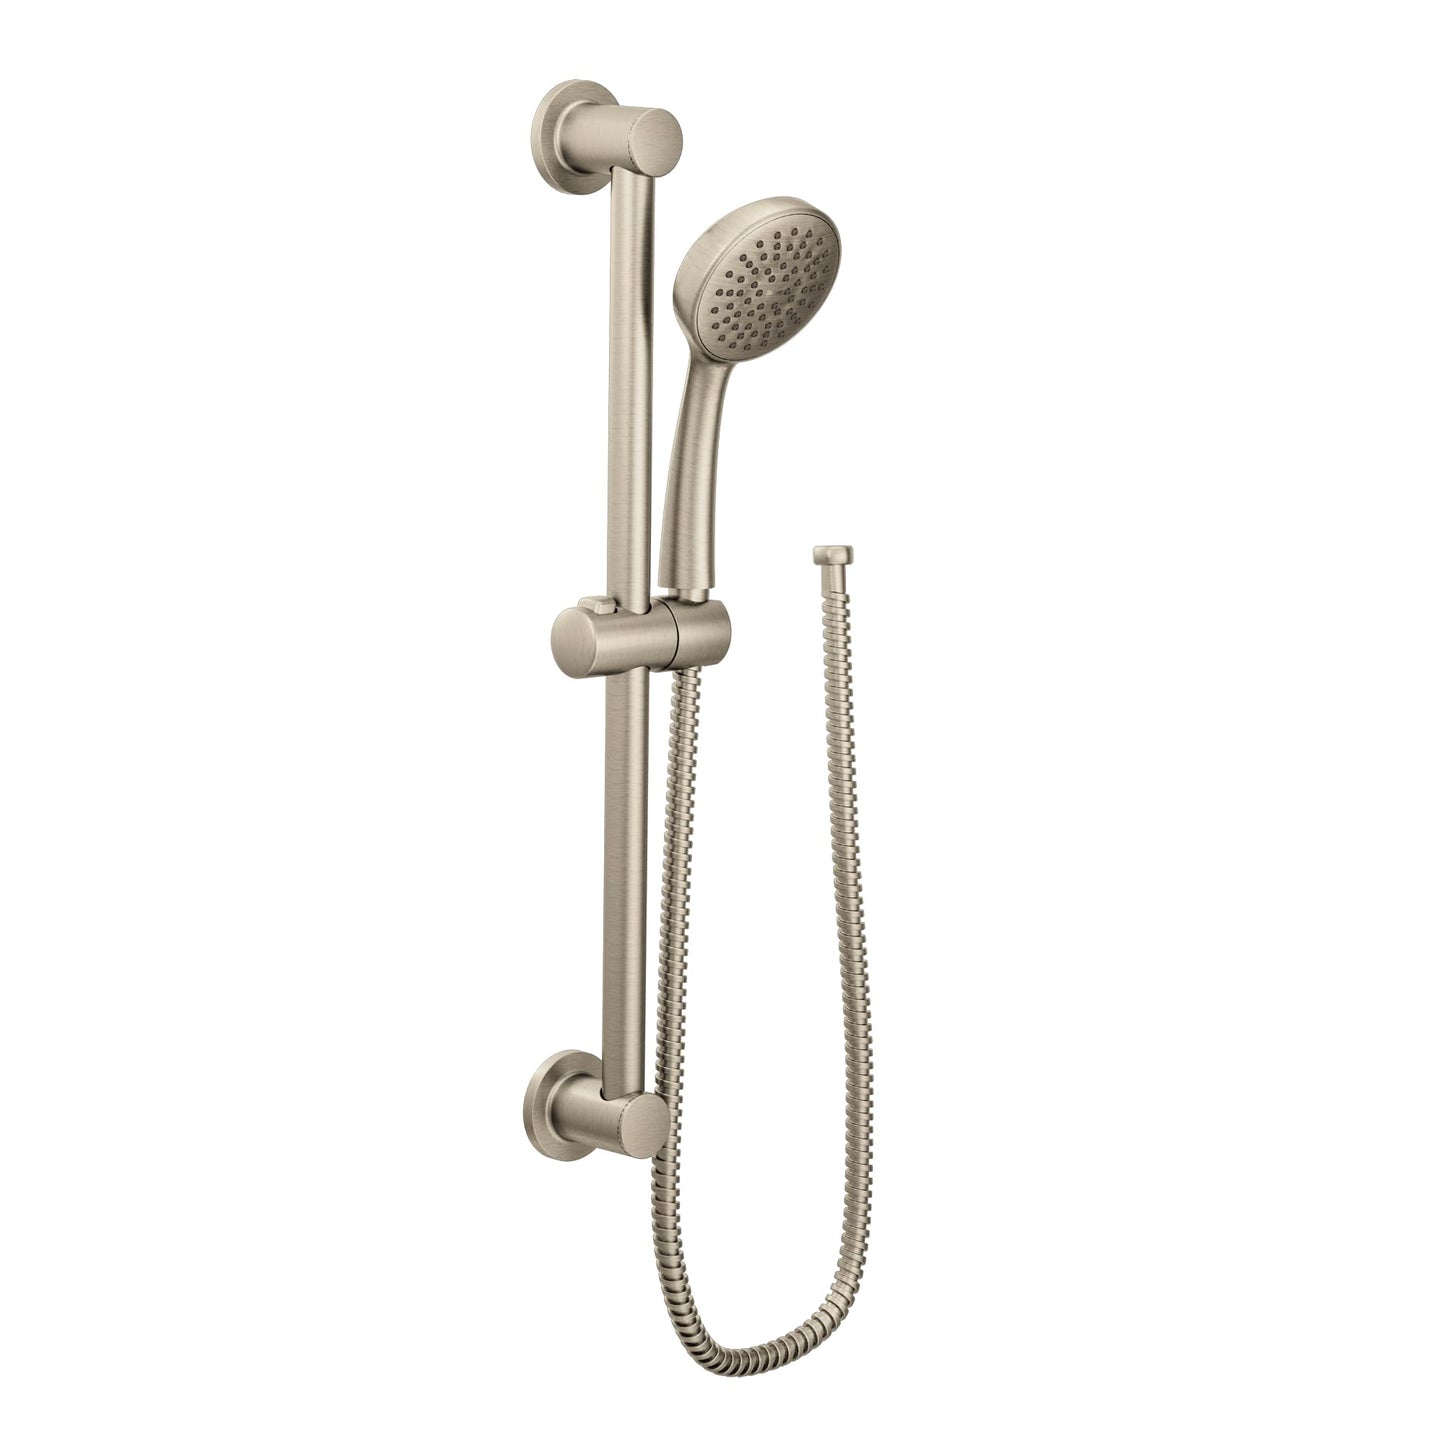 Moen Eco-Performance Brushed Nickel Detachable Handheld Shower Head with 24-Inch Slide Bar and 69-Inch Hose, 3868EPBN